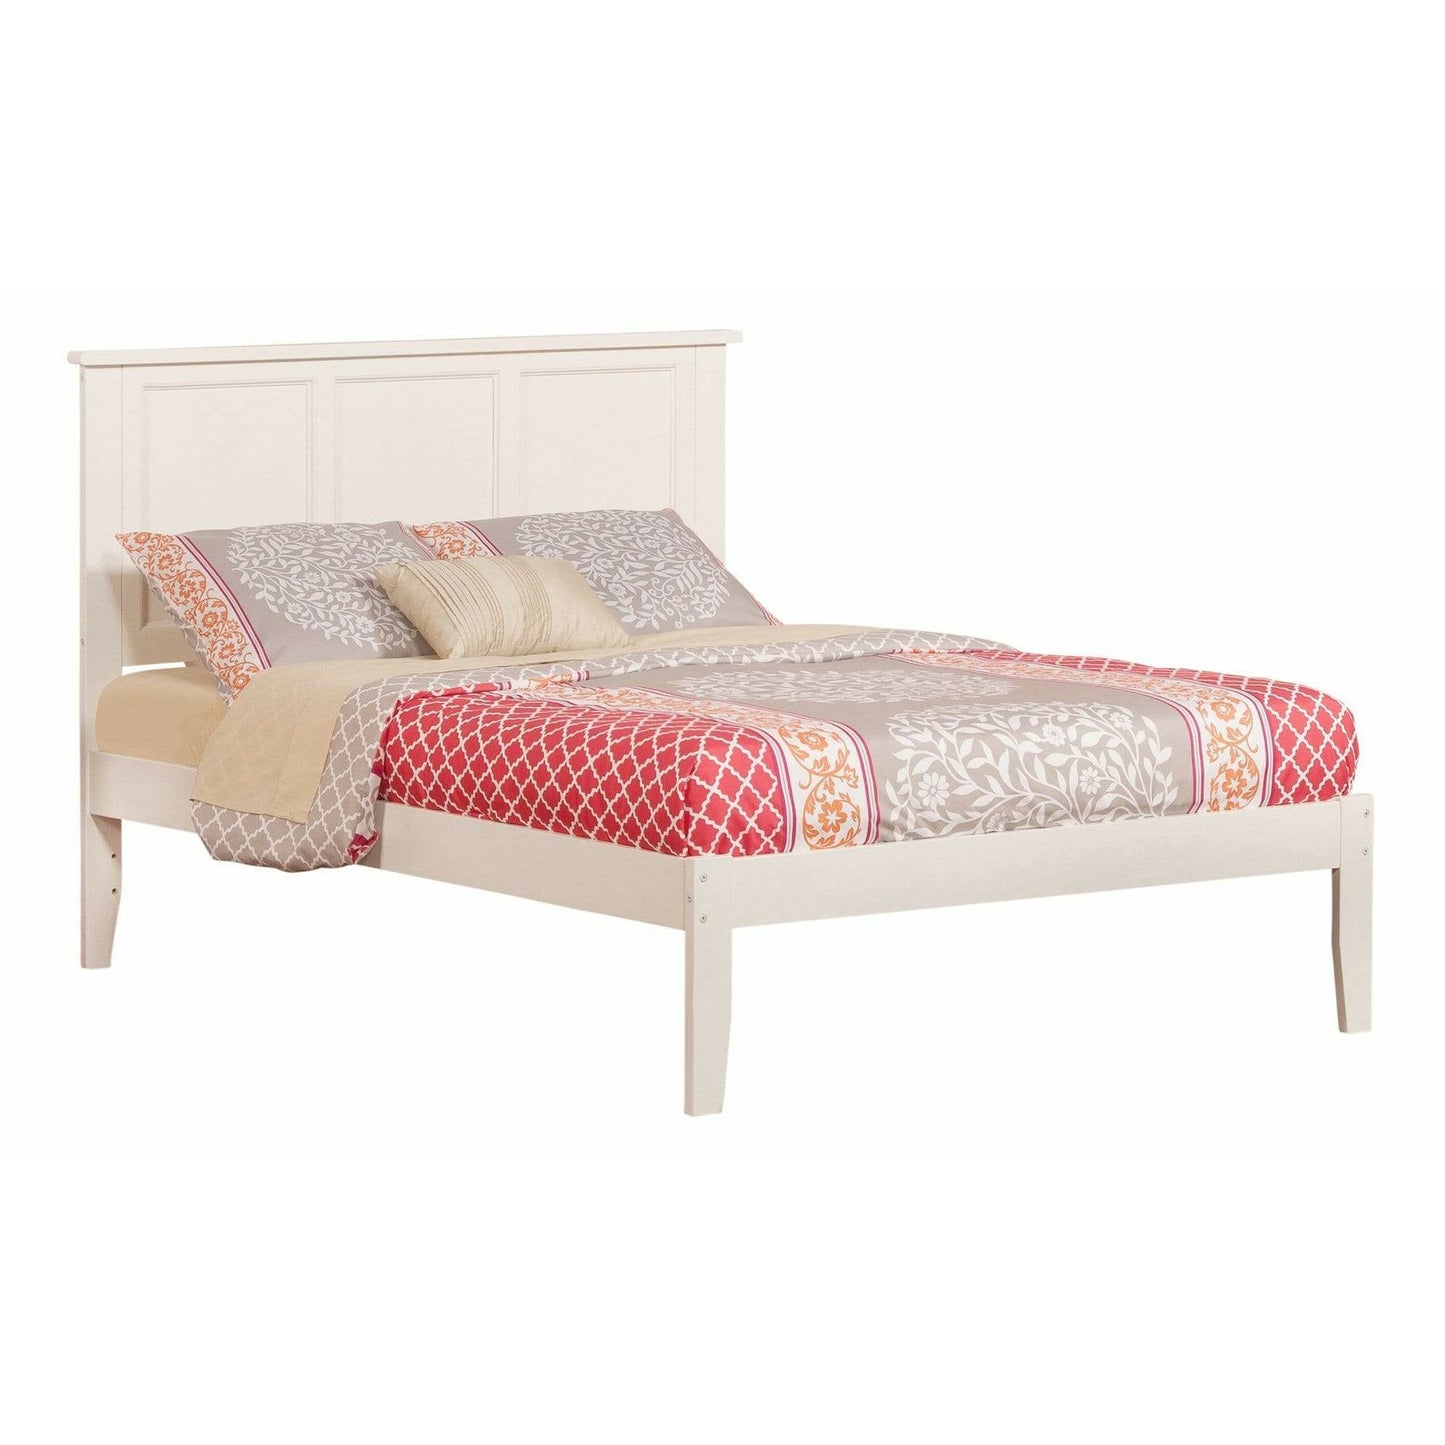 Atlantic Furniture Bed White Madison Full Platform Bed with Open Foot Board in Espresso